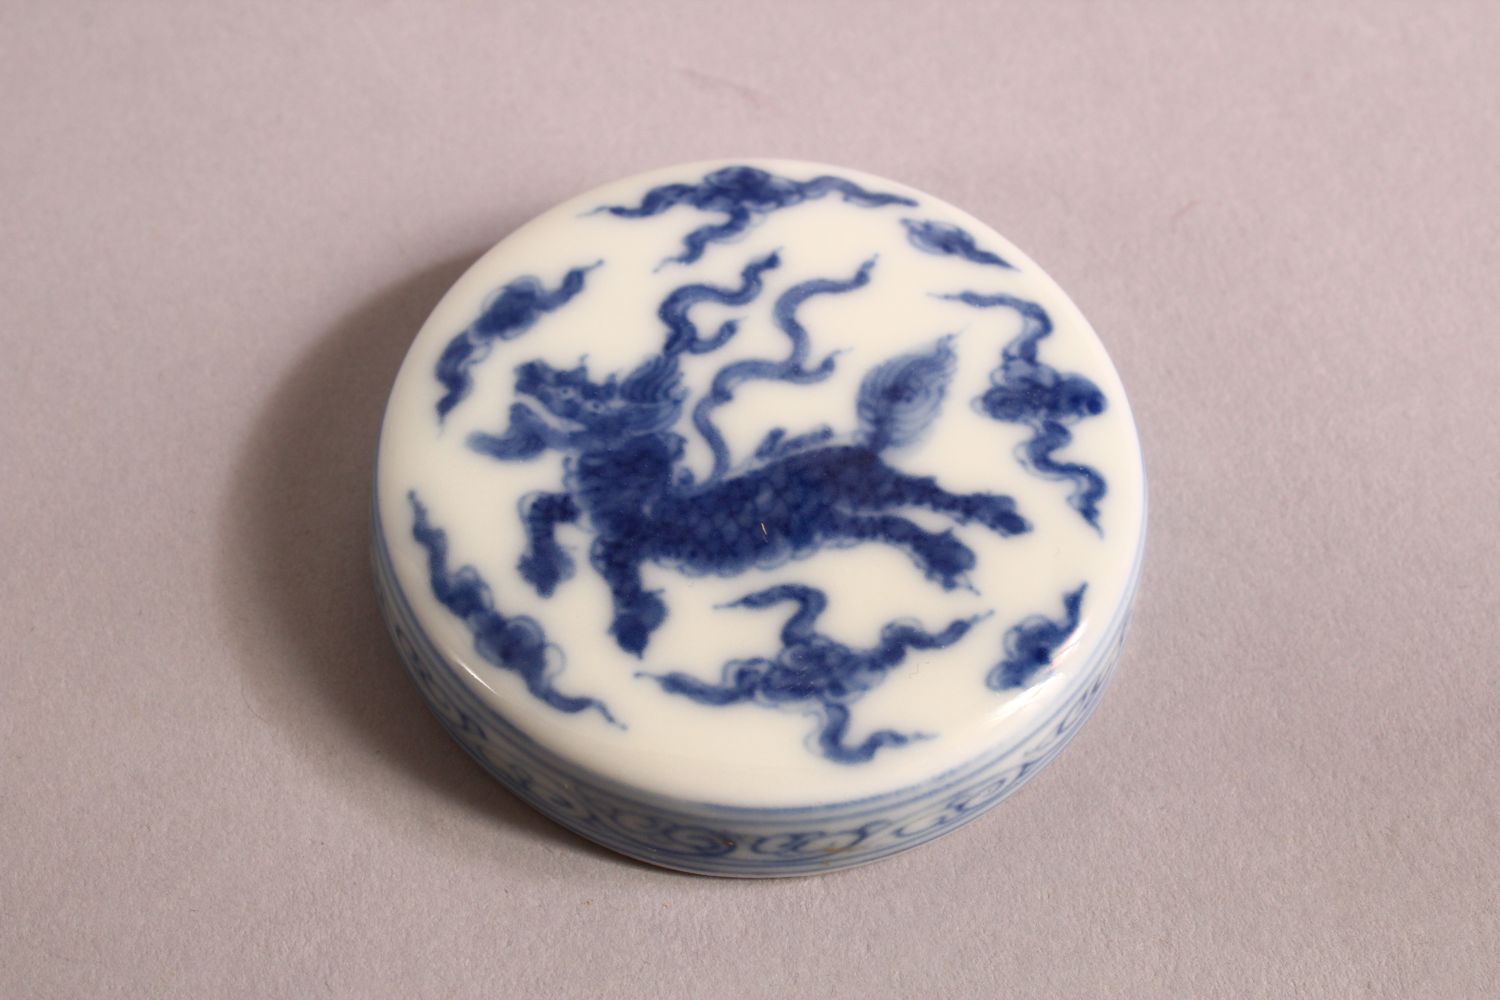 A CHINESE BLUE & WHITE PORCELAIN JAR & COVER, with decoration of kylin and clouds, base with a mark, - Image 6 of 7